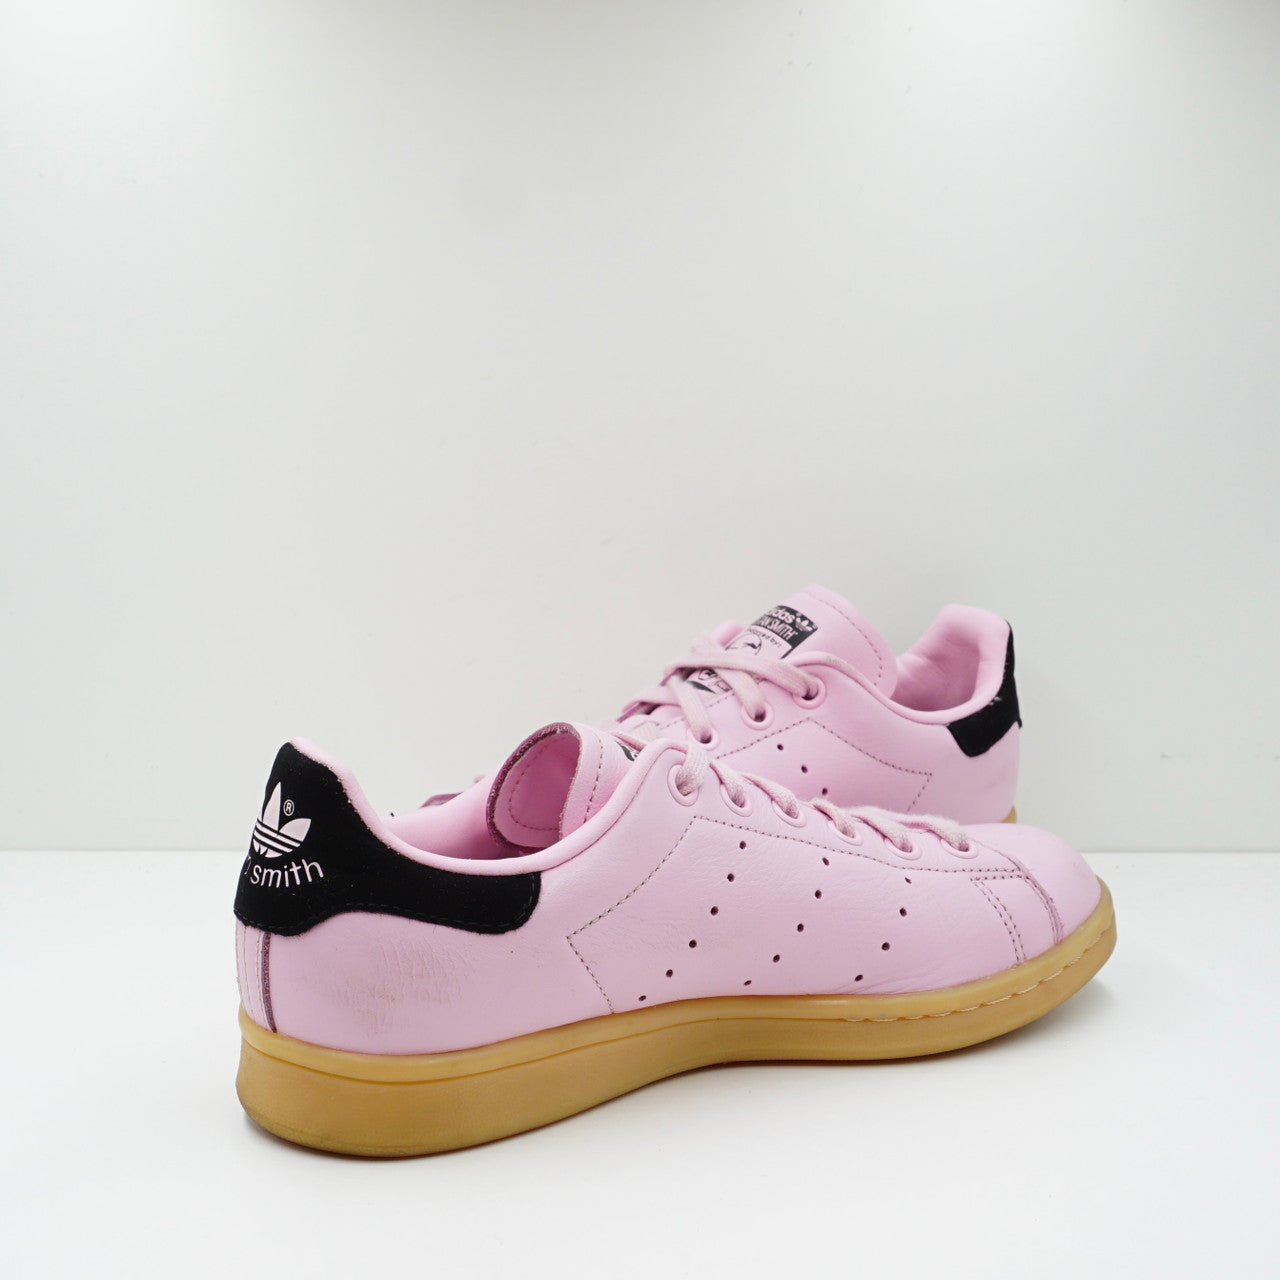 Adidas Stan Smith Cotton Candy Pink (W)